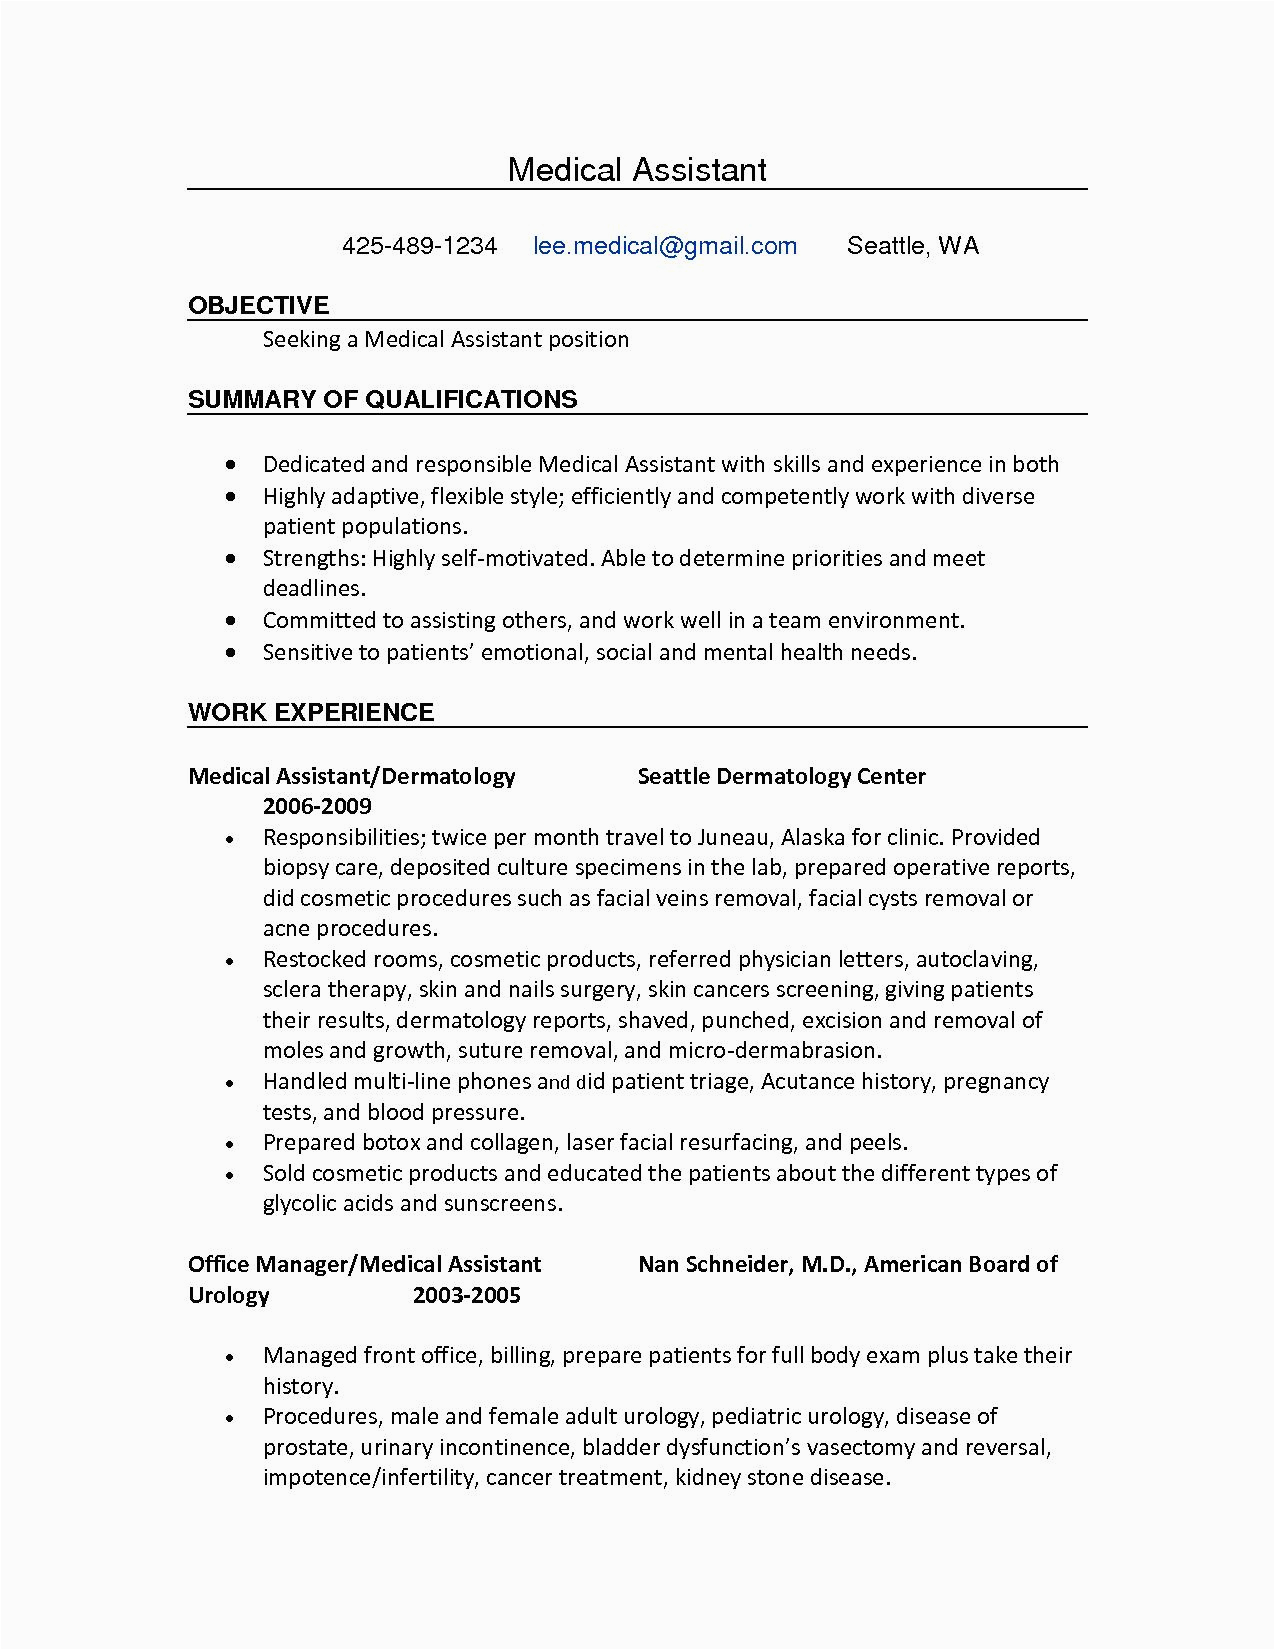 Sample Resume for Medical Receptionist with No Experience Front Desk Jobs with No Experience